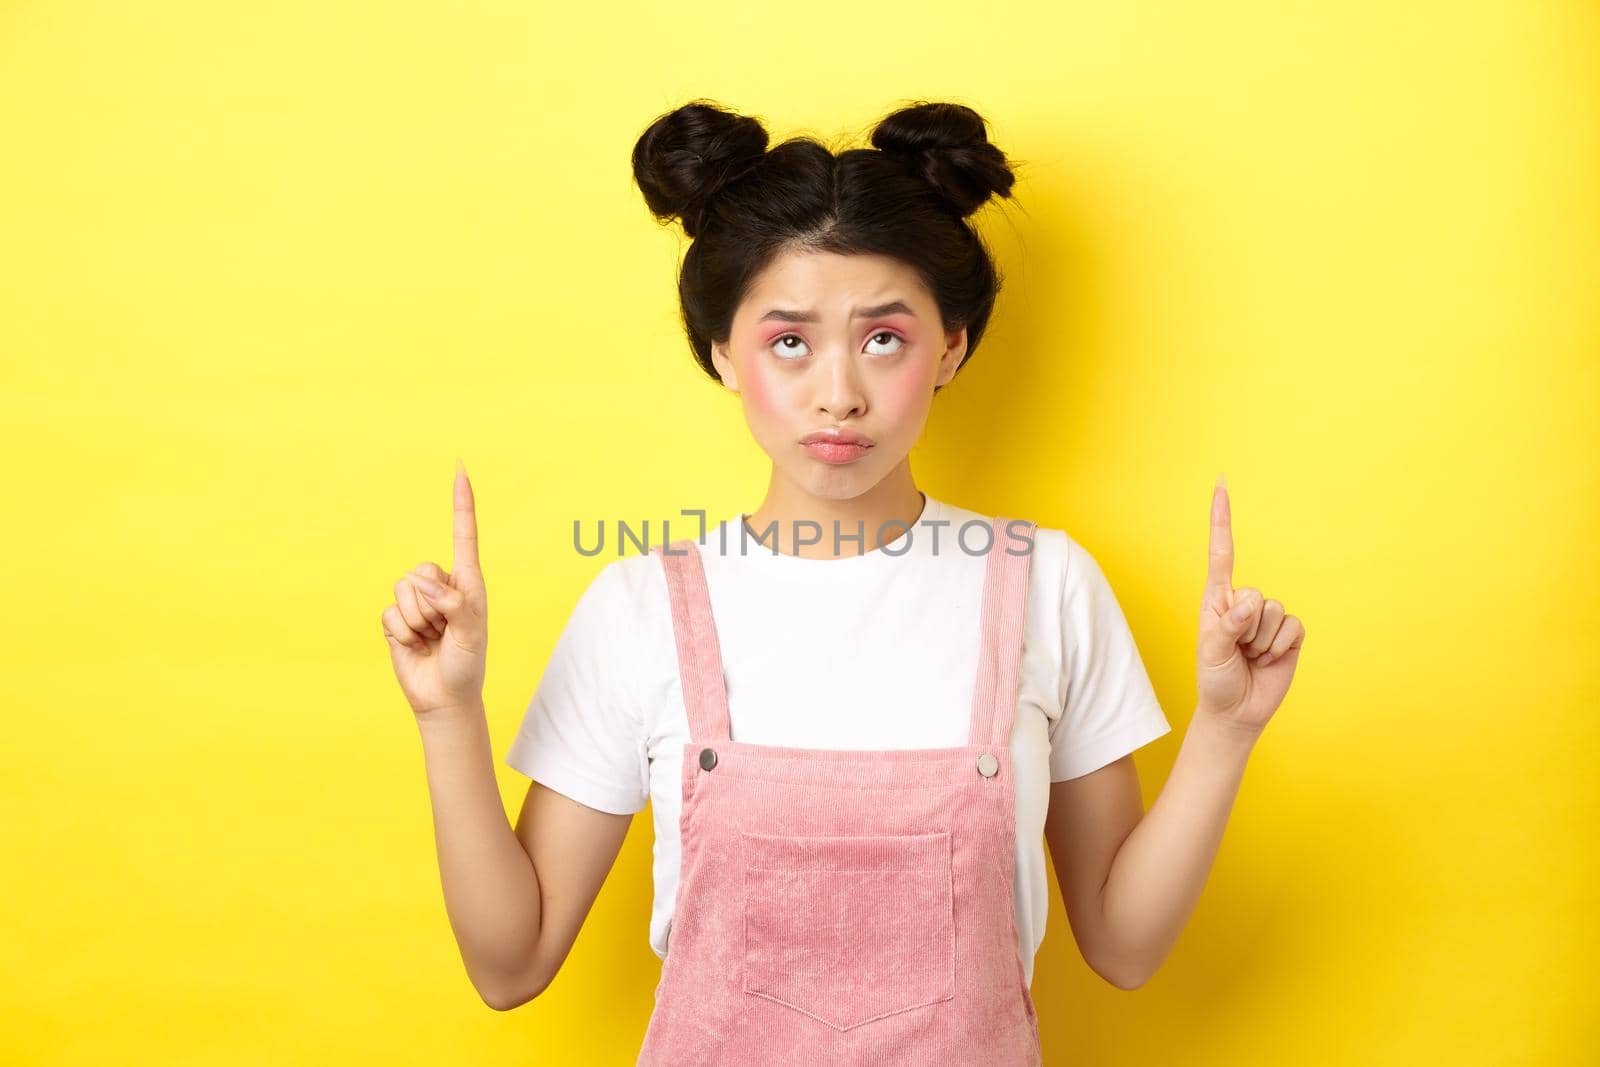 Skeptical teenage asian girl with glam pink makeup, pointing and looking up unamused, standing reluctant on yellow background.